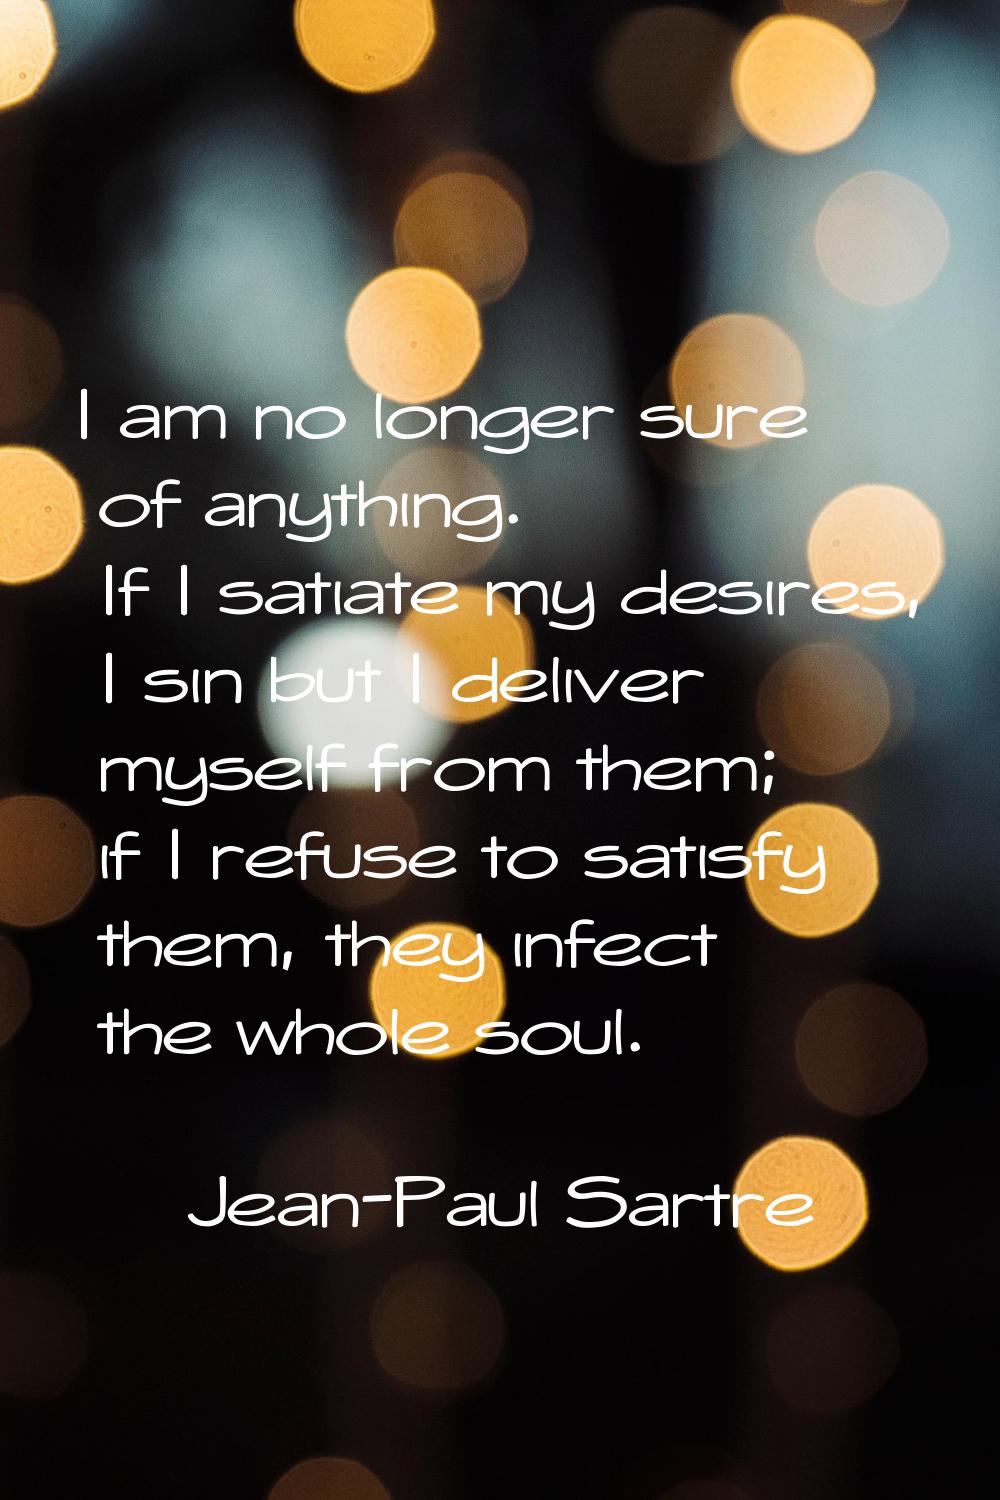 I am no longer sure of anything. If I satiate my desires, I sin but I deliver myself from them; if 